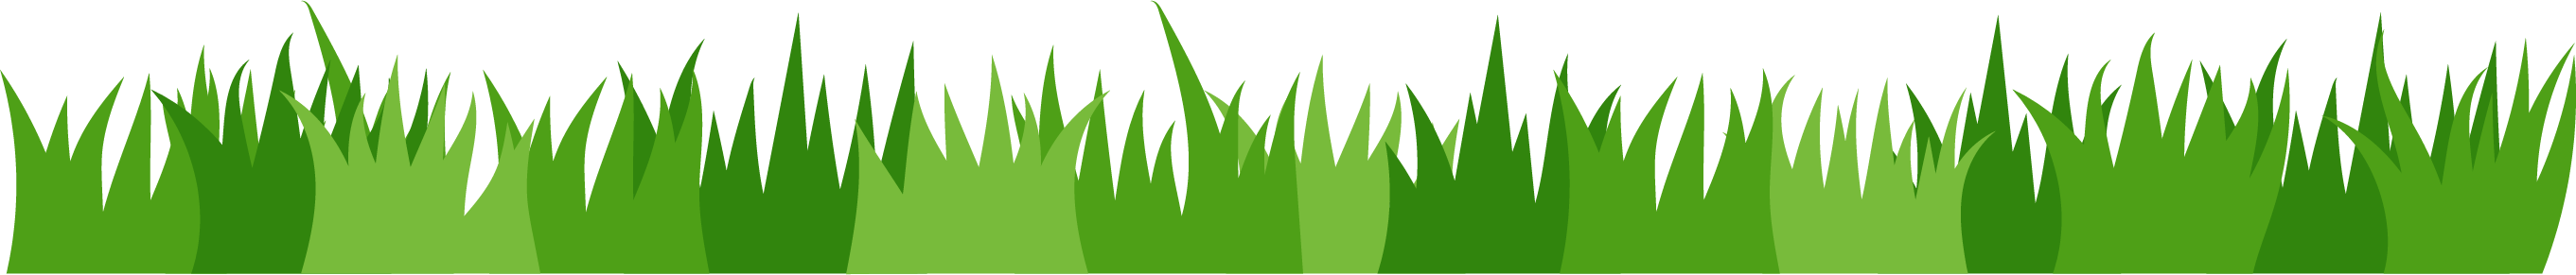 moving clipart grass